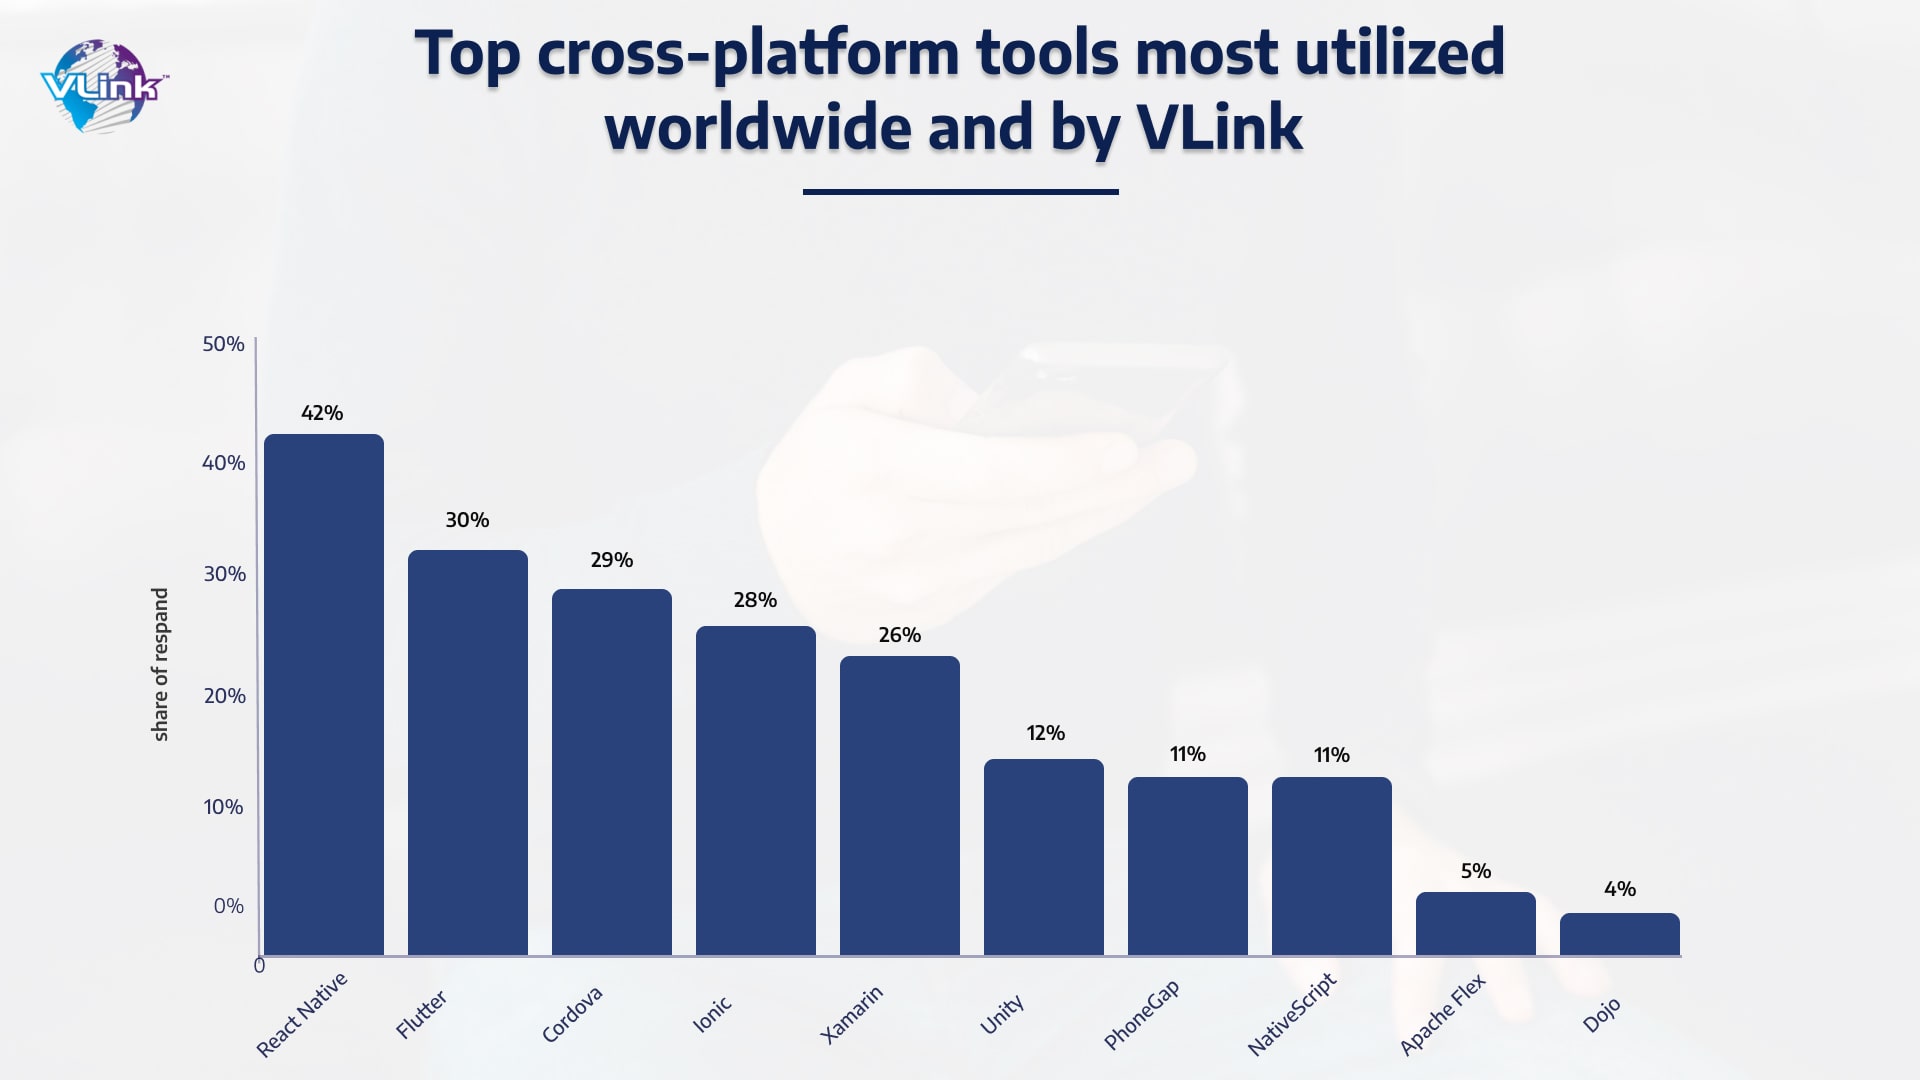 Top cross-platform tools most utilized worldwide and by VLink